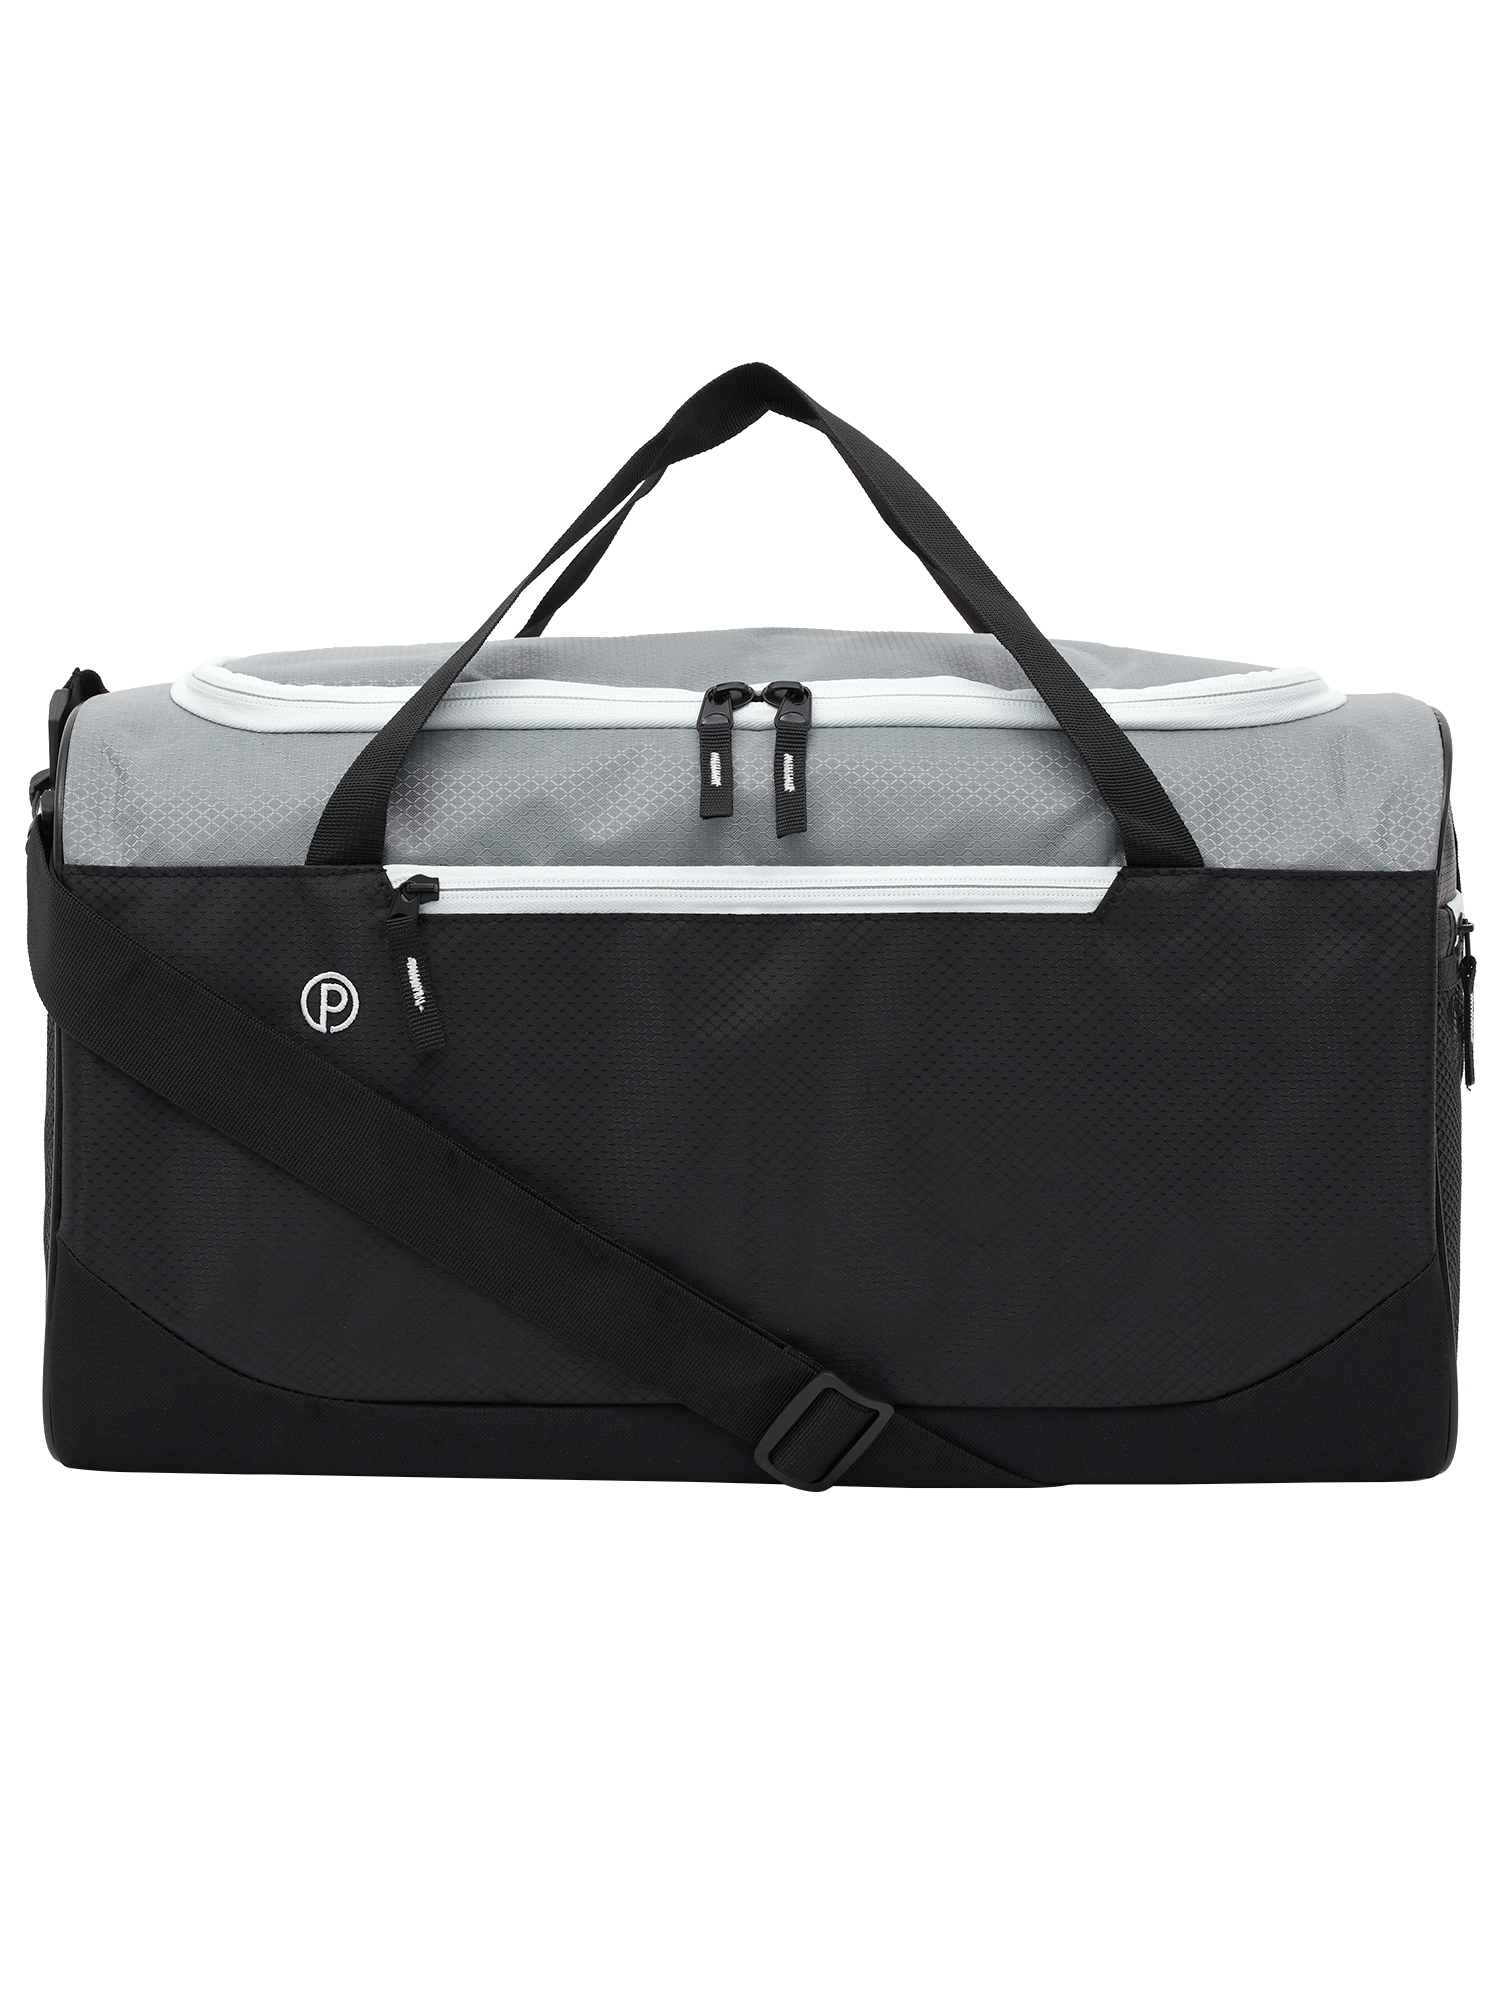 Protege 18" Polyester Sport Duffel - Black - image 1 of 10